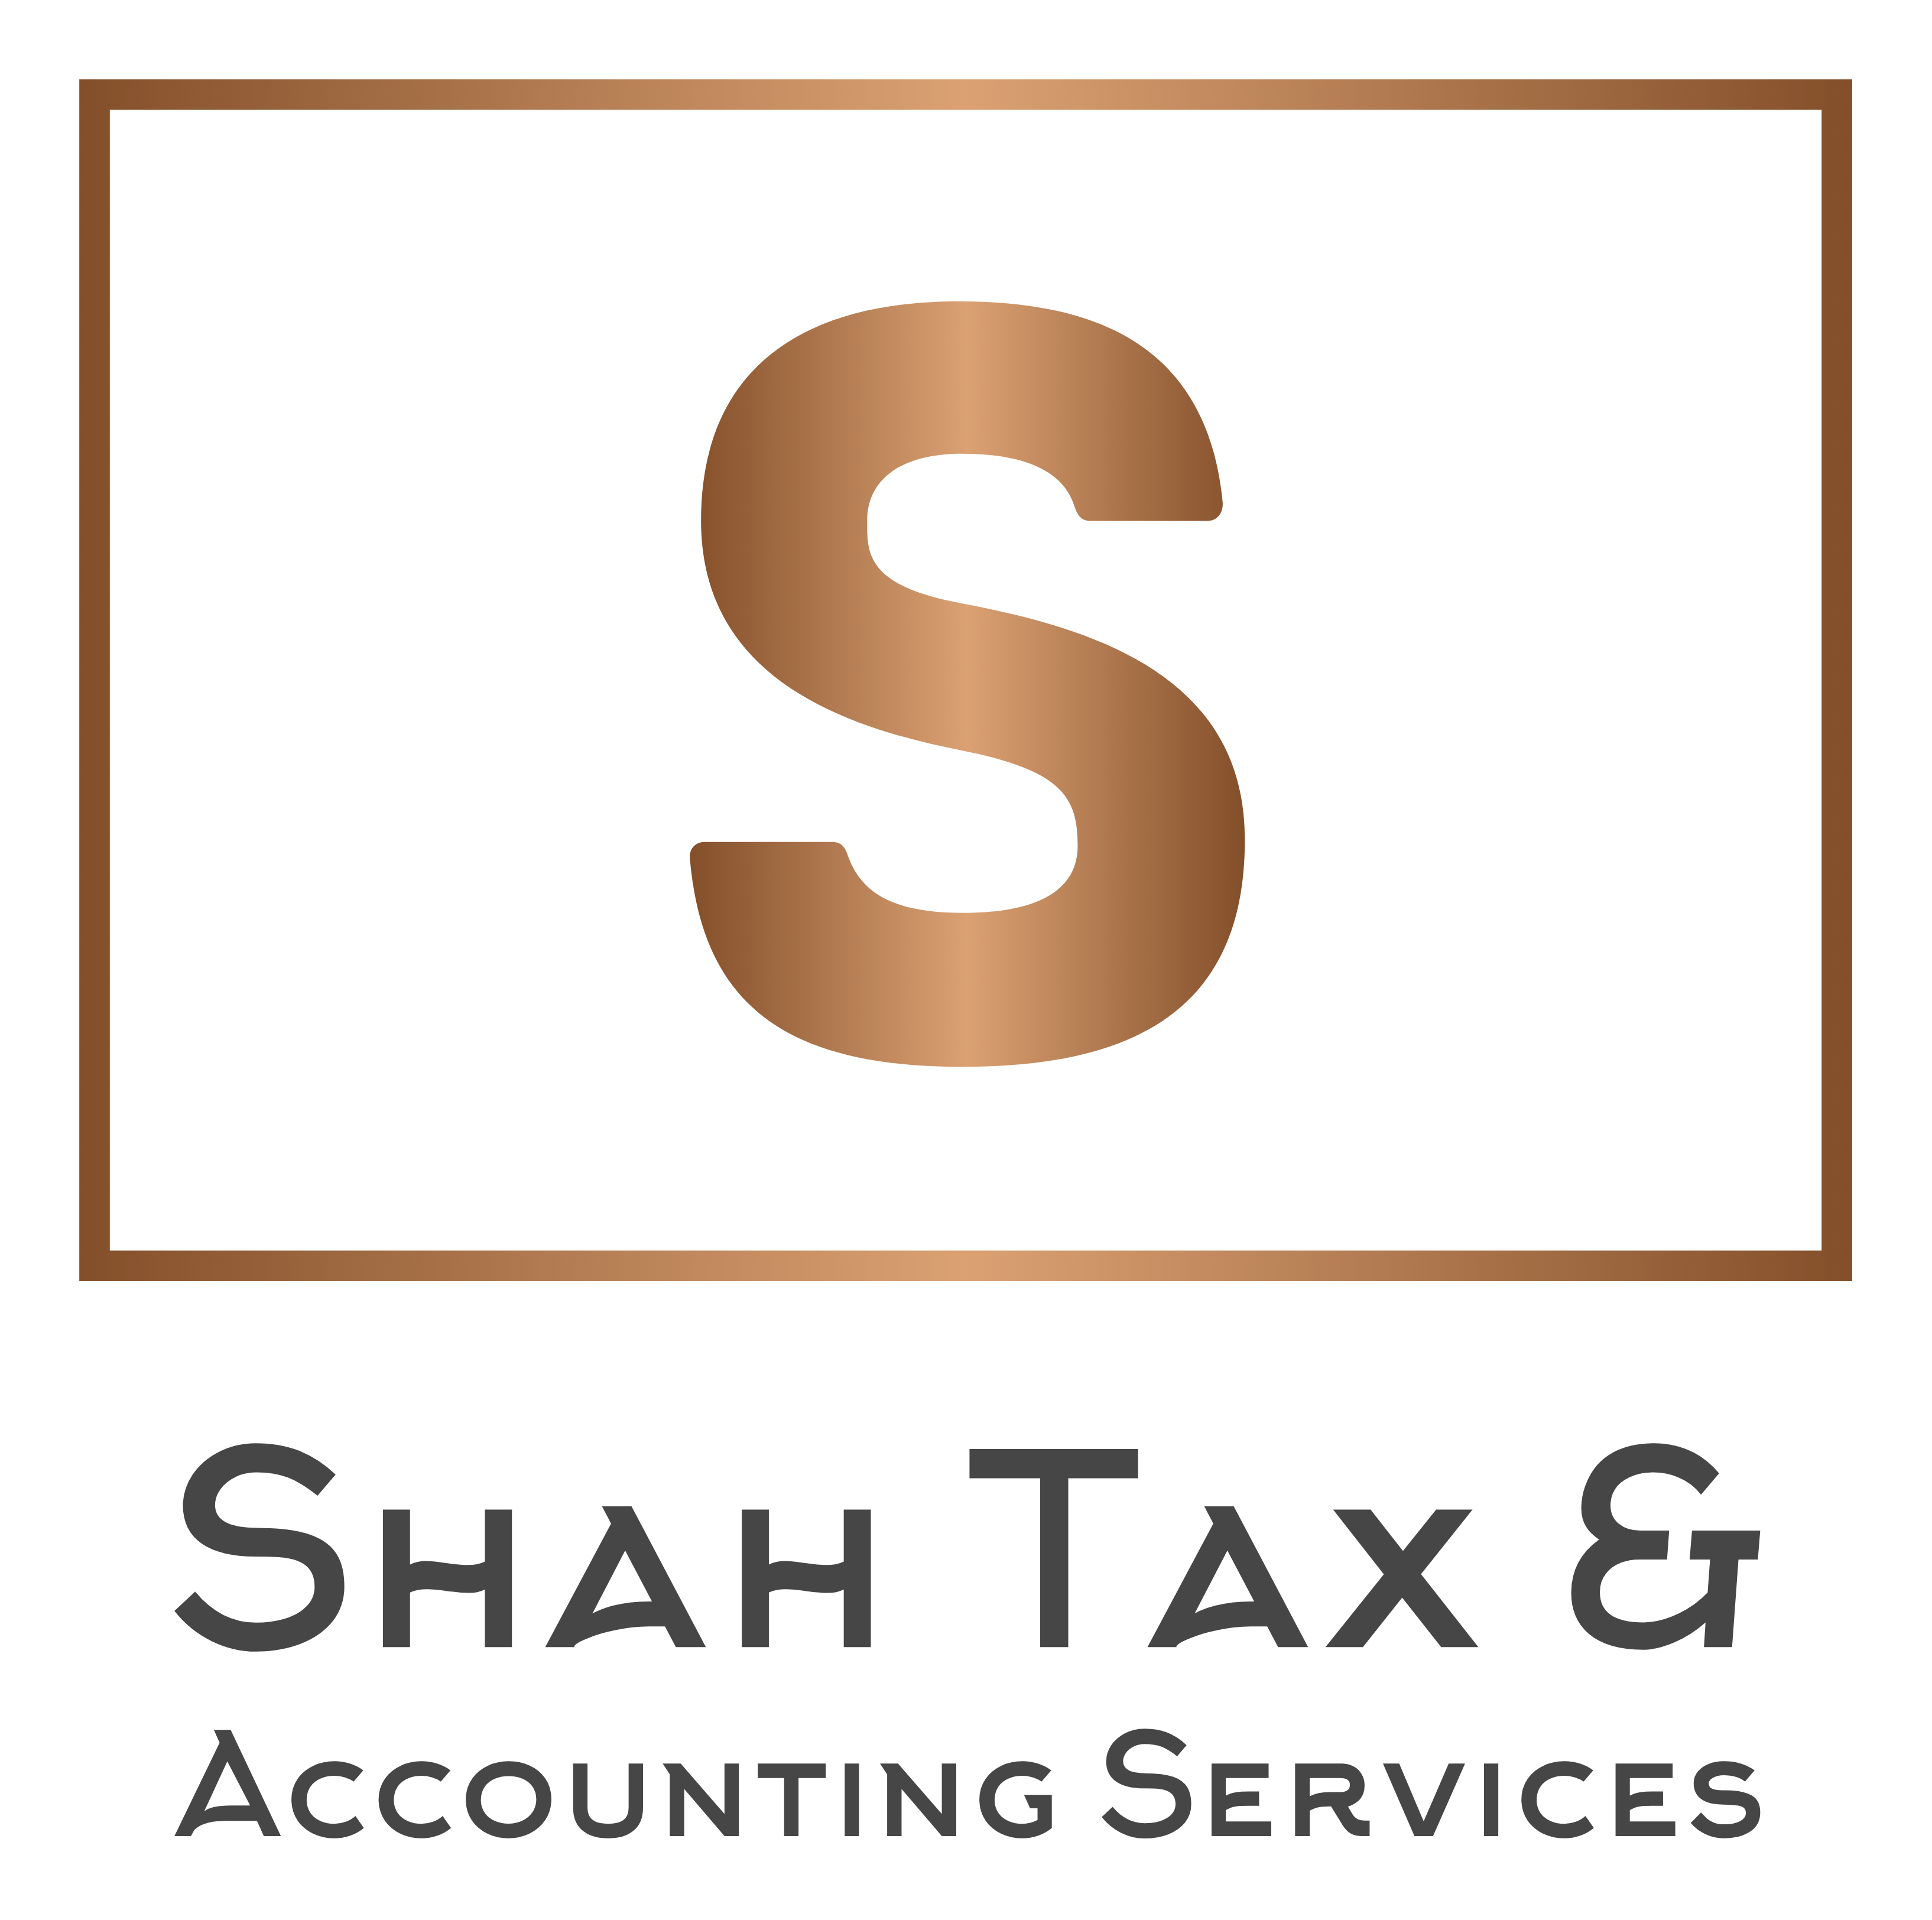 Welcome to Shah Tax & Accounting Services, LLC